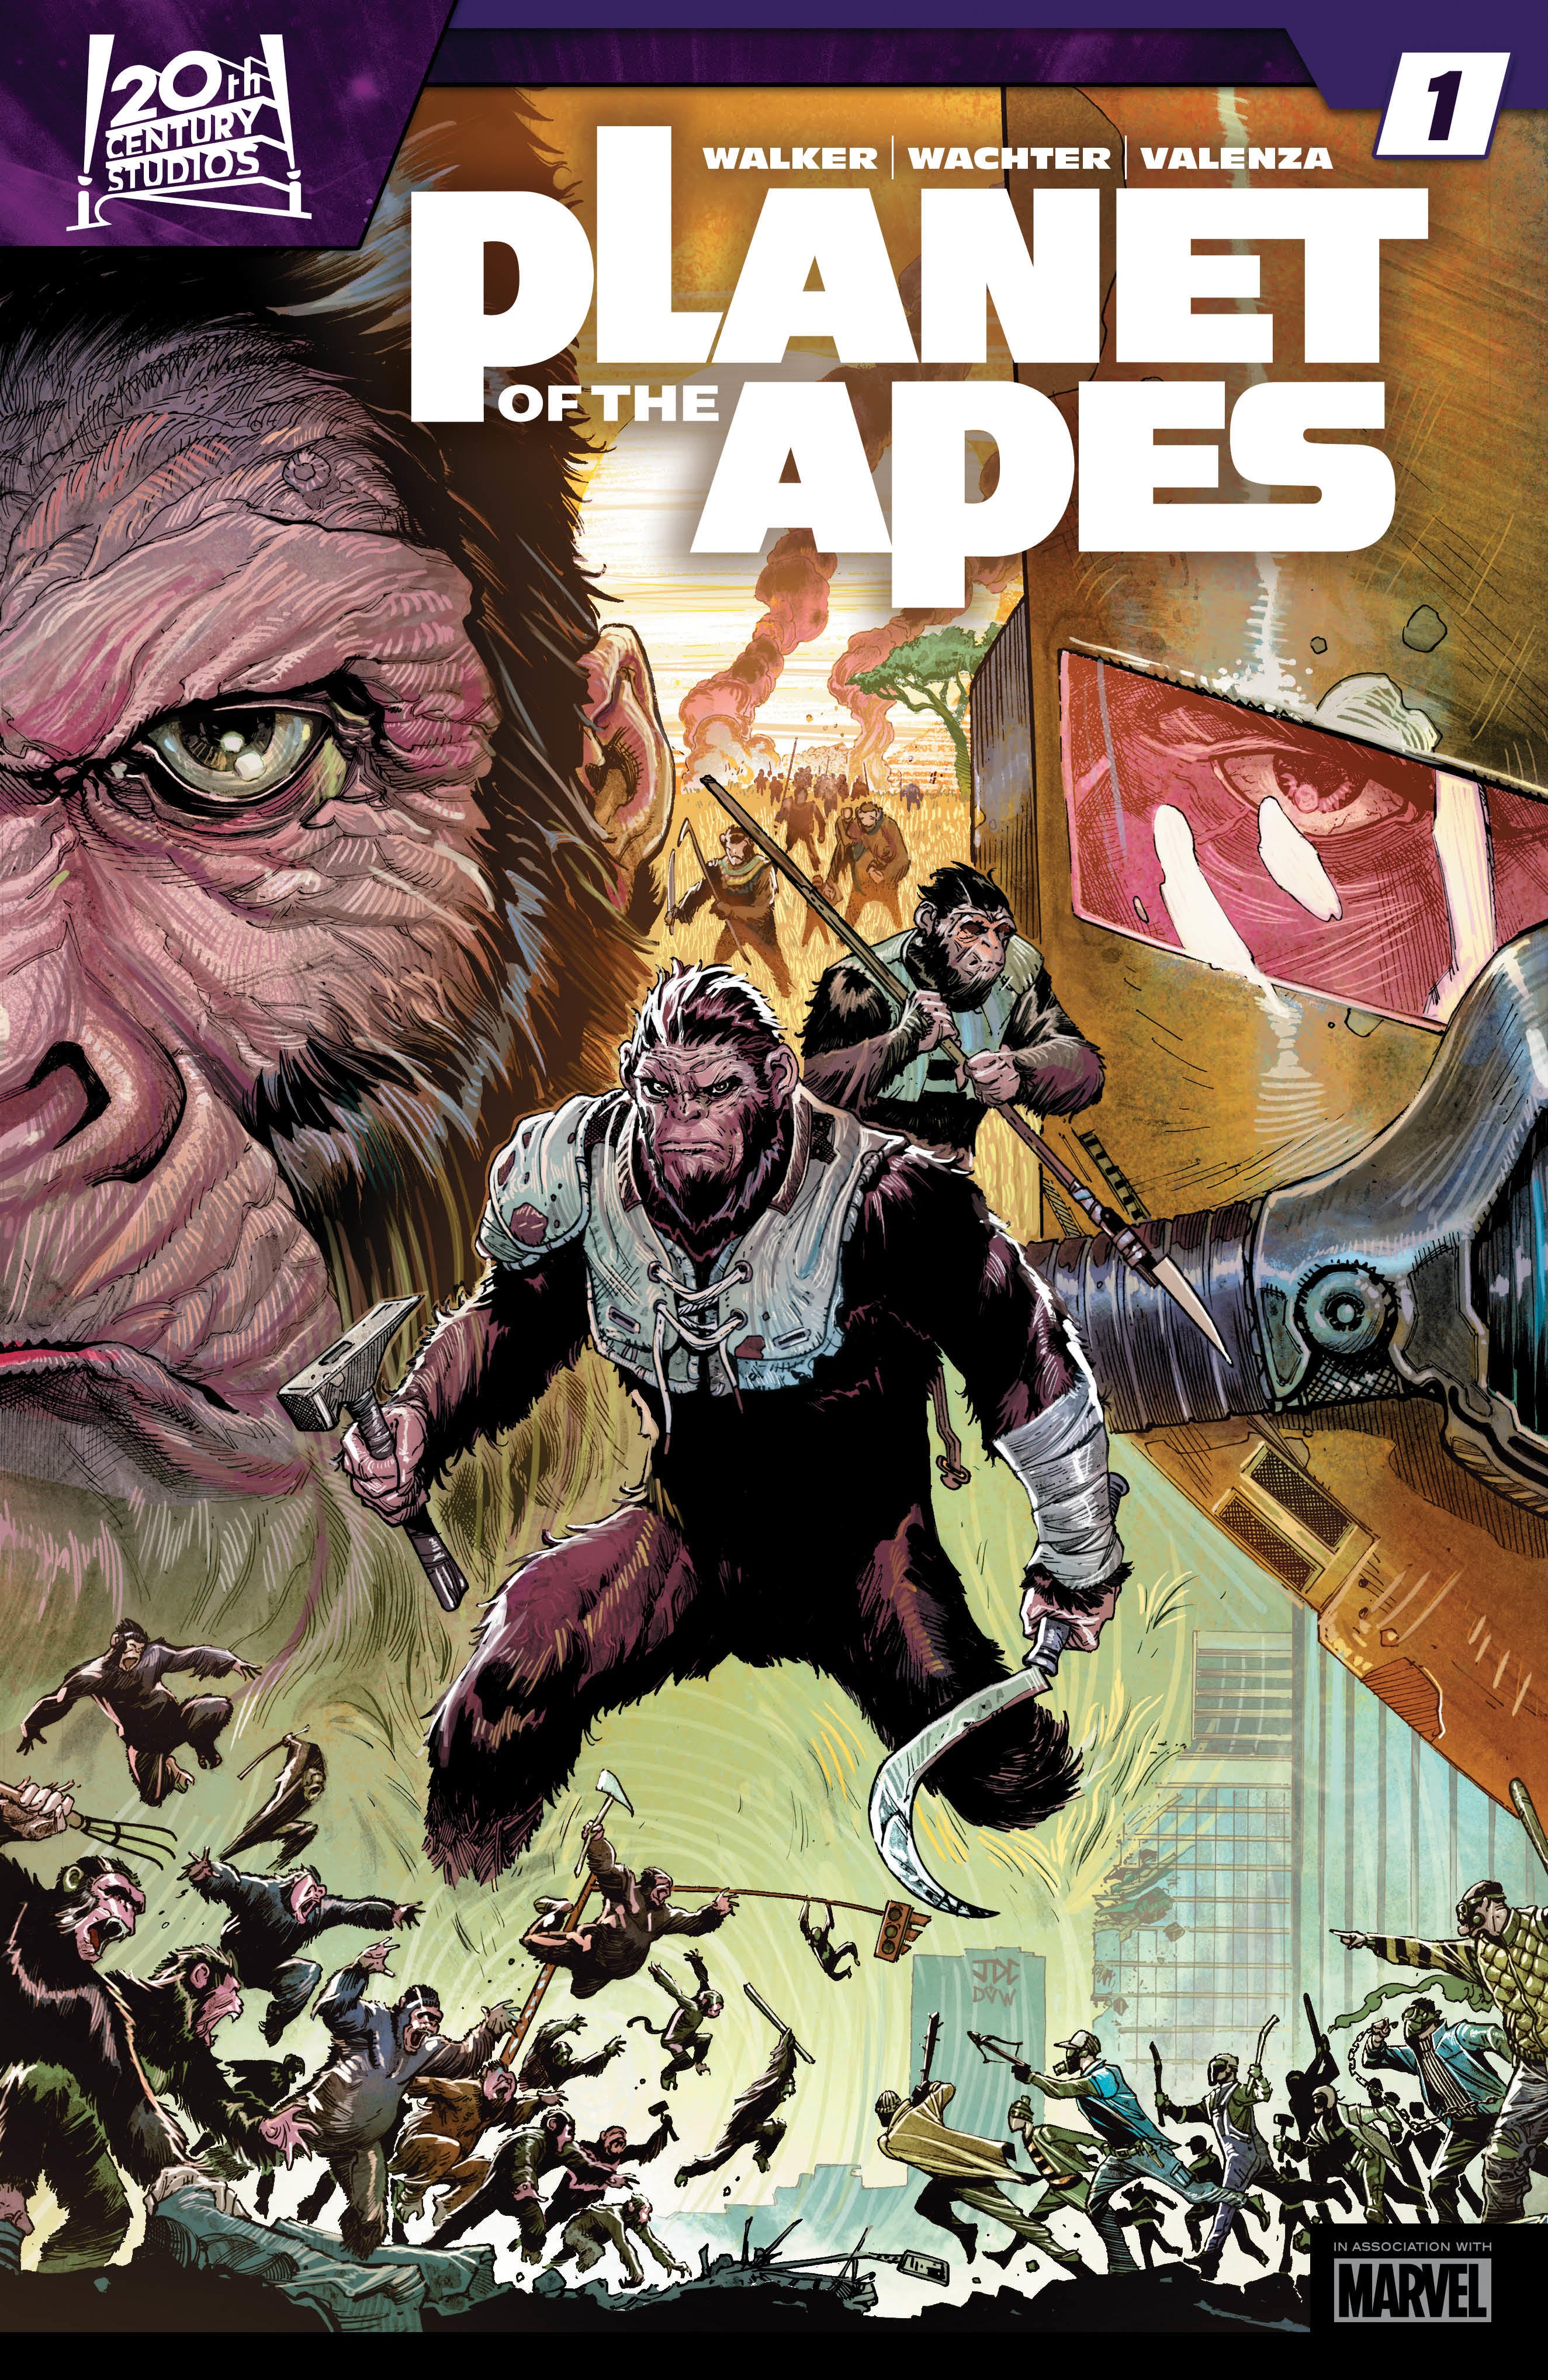 Marvel Launches 20th Century Studios Imprint With Planet of the Apes, Alien, and Predator